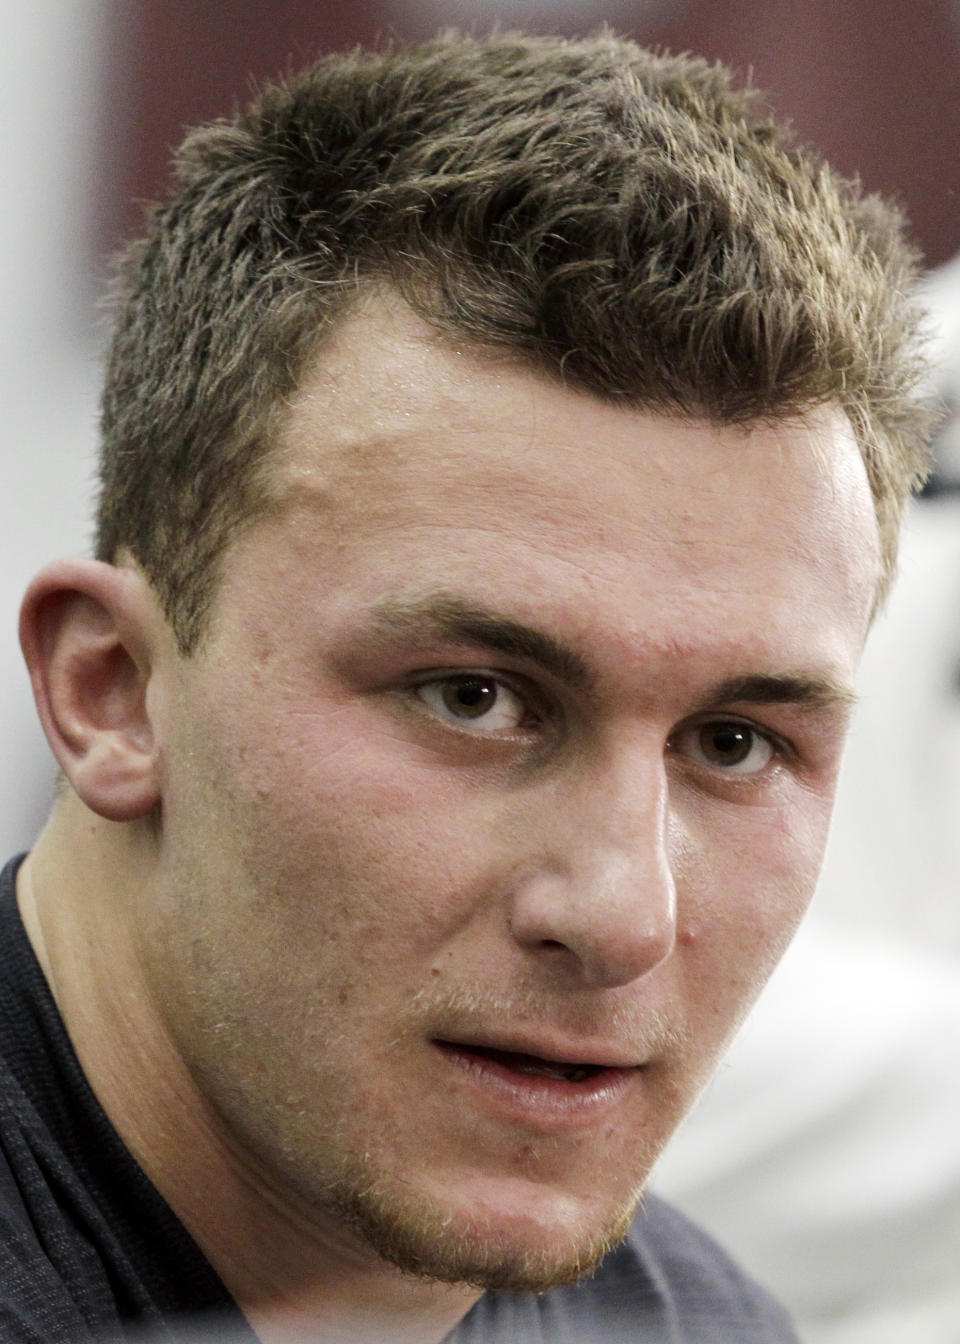 Texas A&M quarterback Johnny Manziel talks to members of the media during pro day for NFL football representatives in College Station, Texas, Thursday, March 27, 2014. (AP Photo/Patric Schneider)